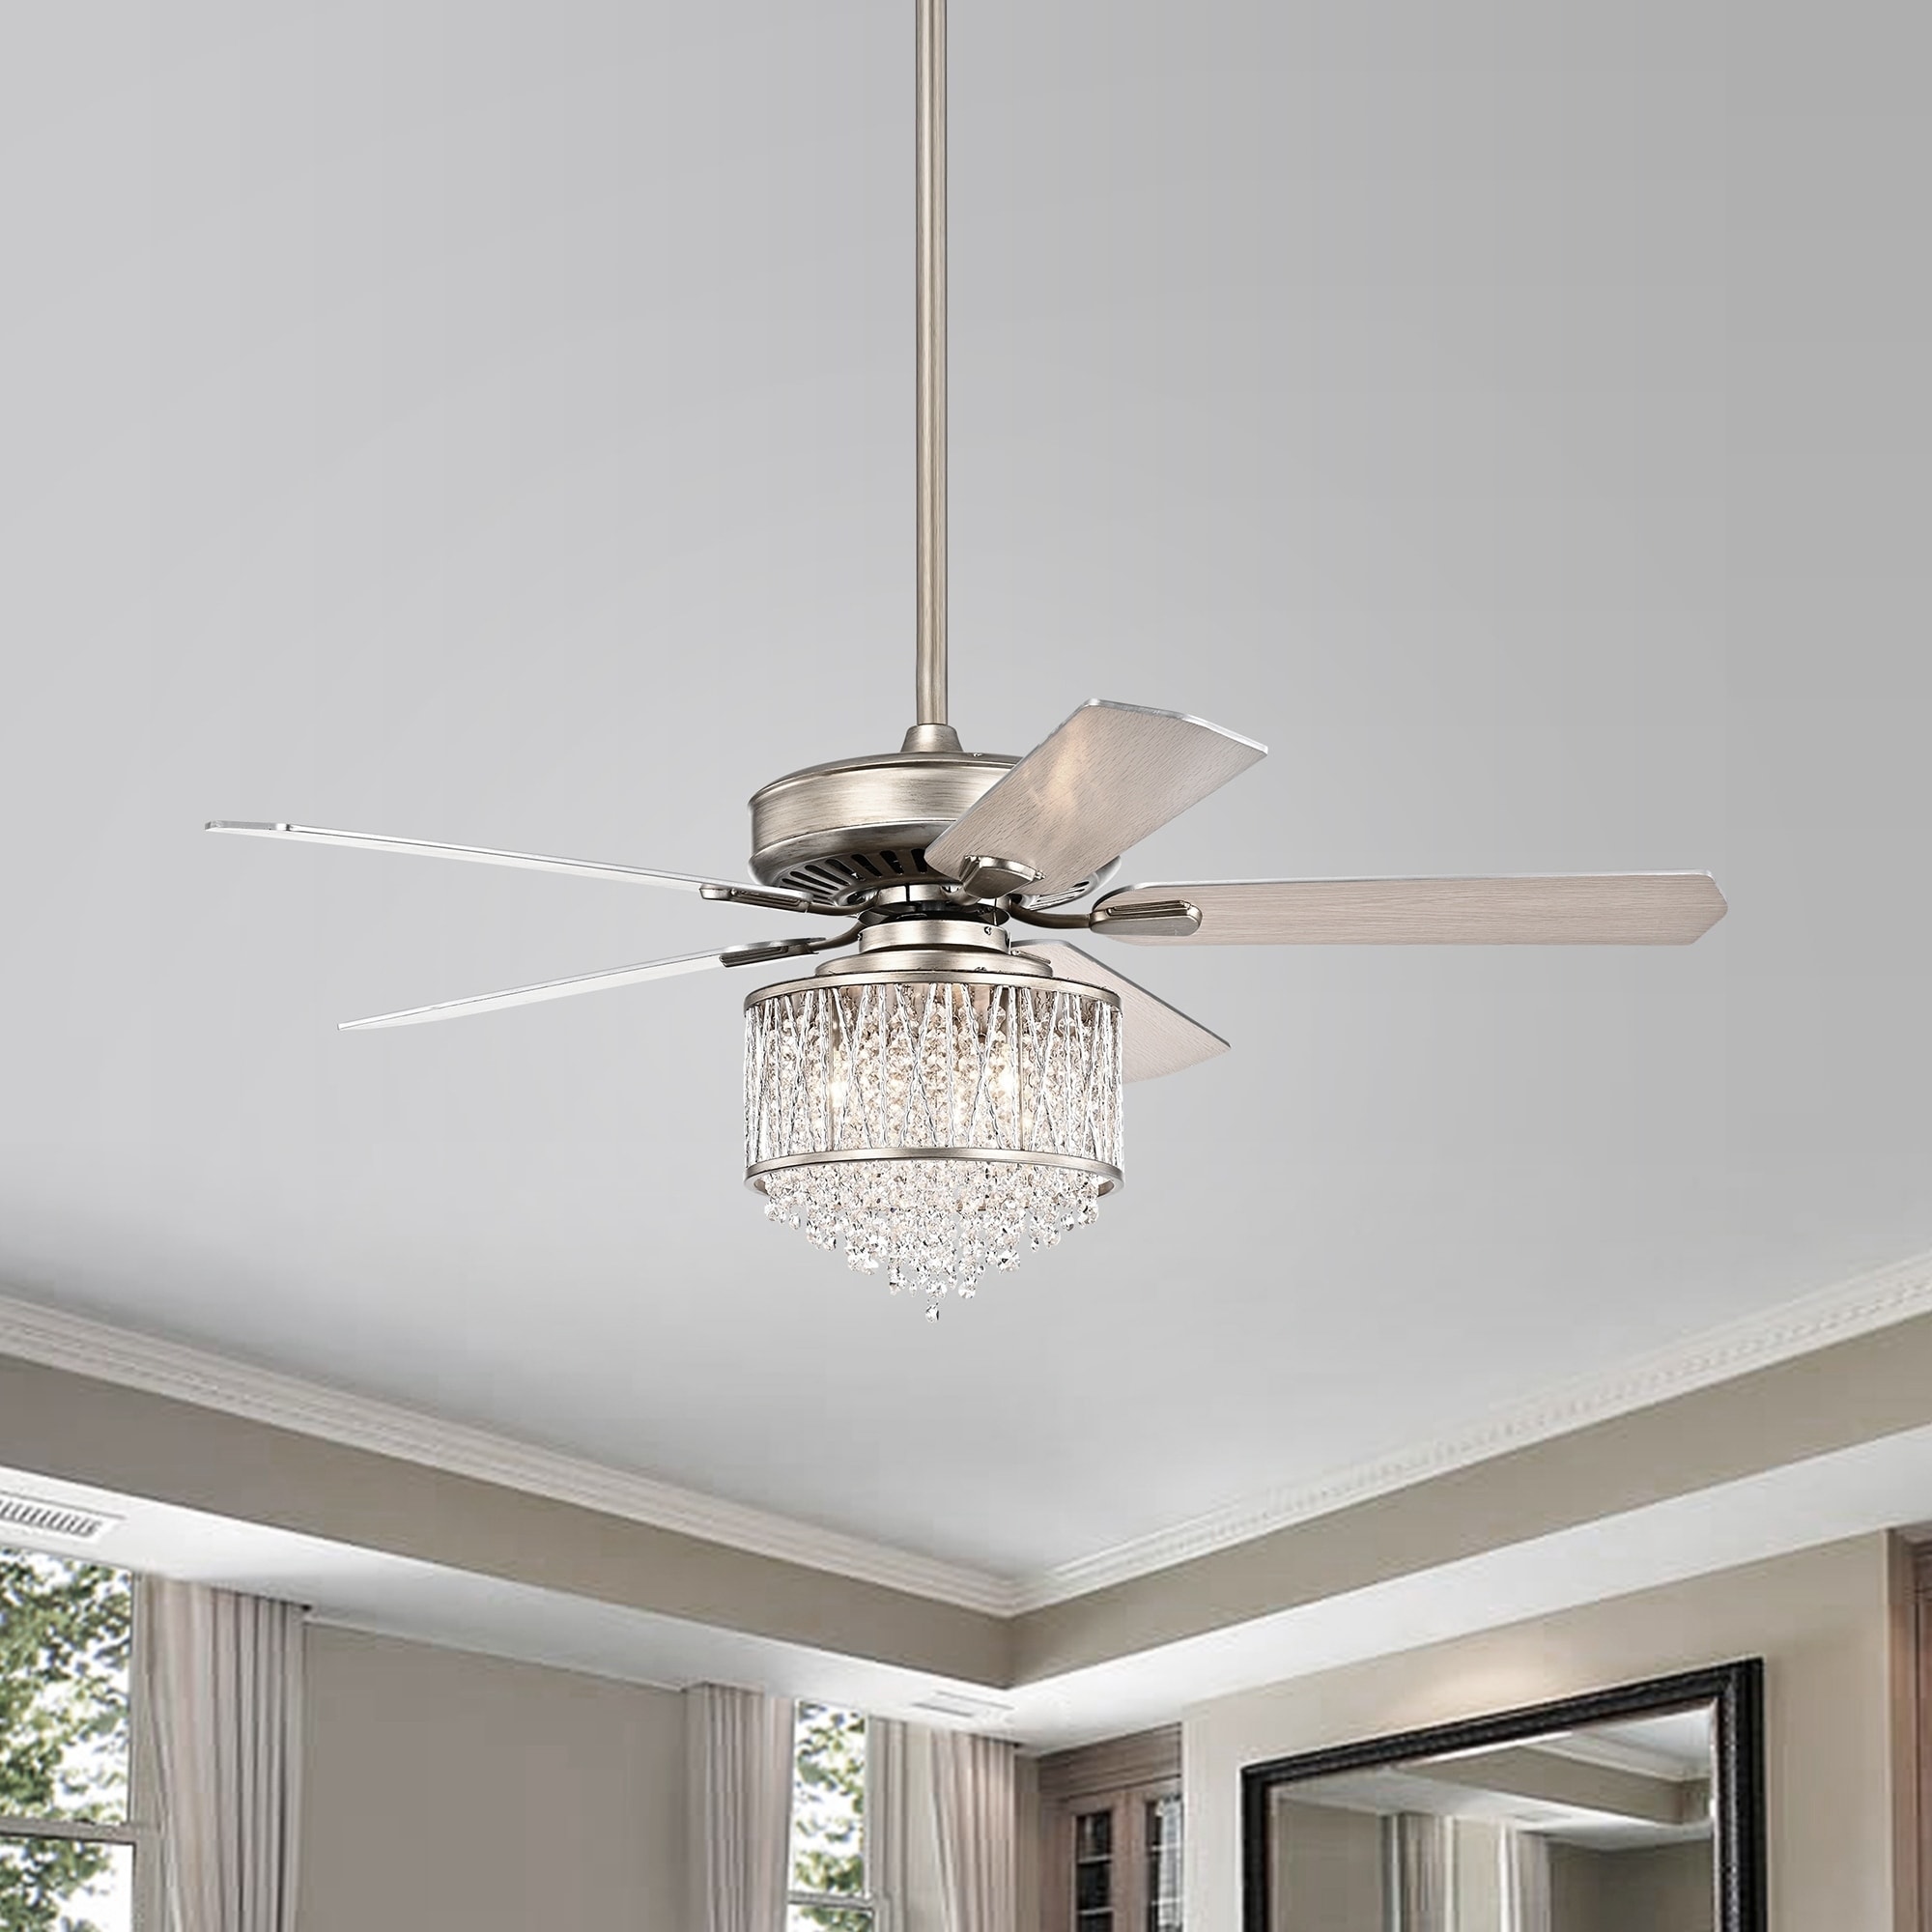 Jauni Chrome 52 Inch 5 Blade Ceiling Fan With Metal Drum Shade Includes Remote